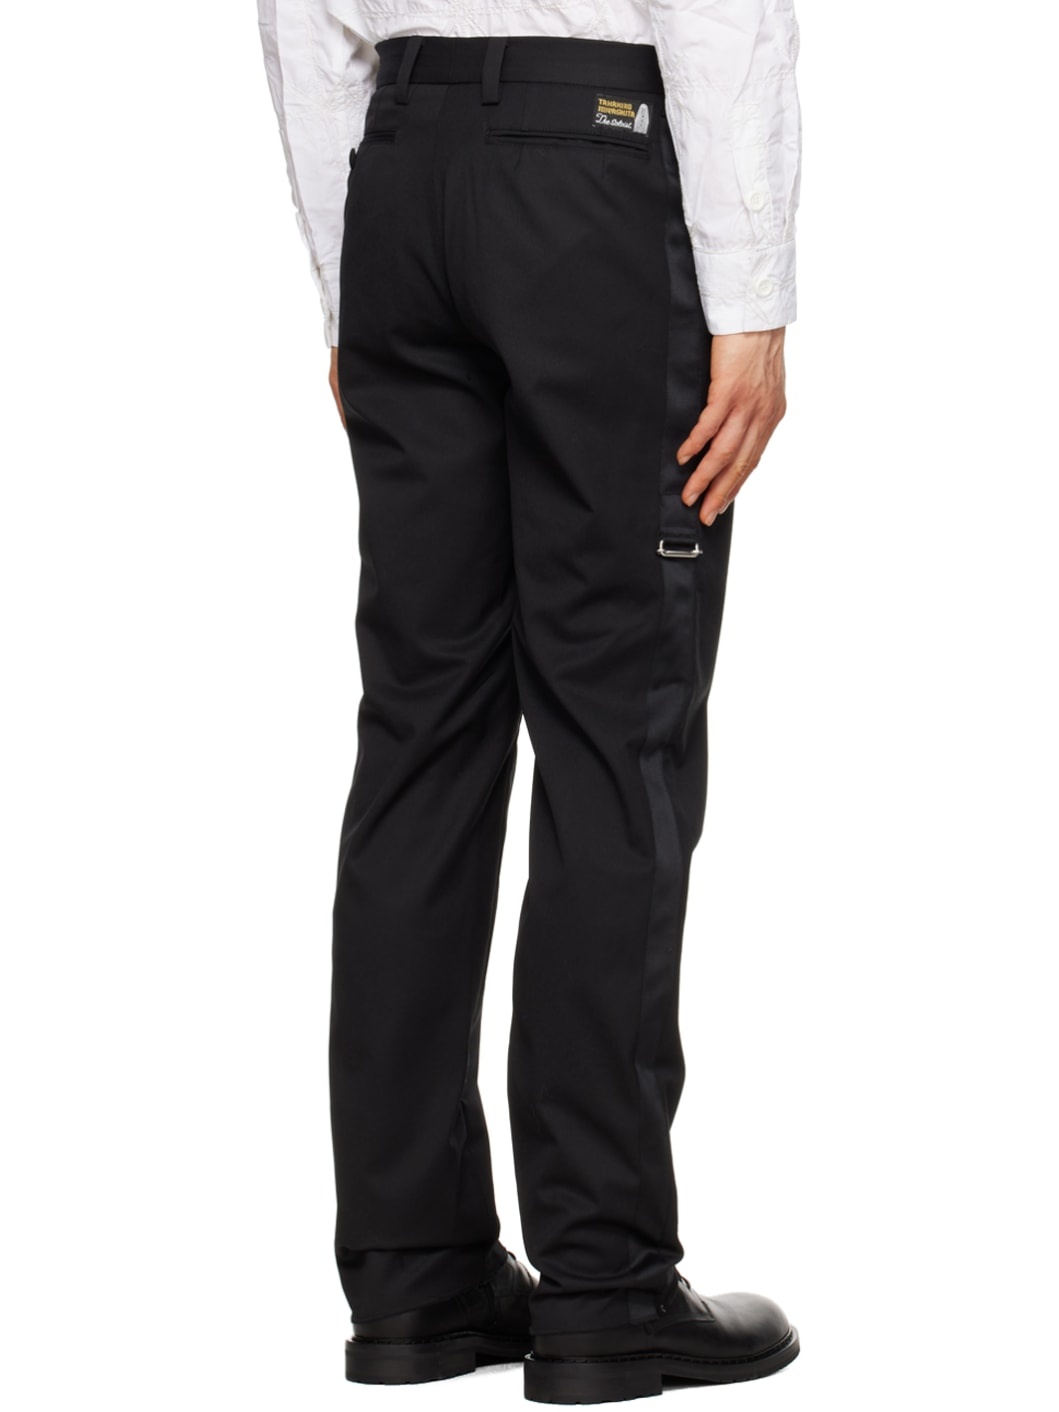 Black Convertible Trousers - 3